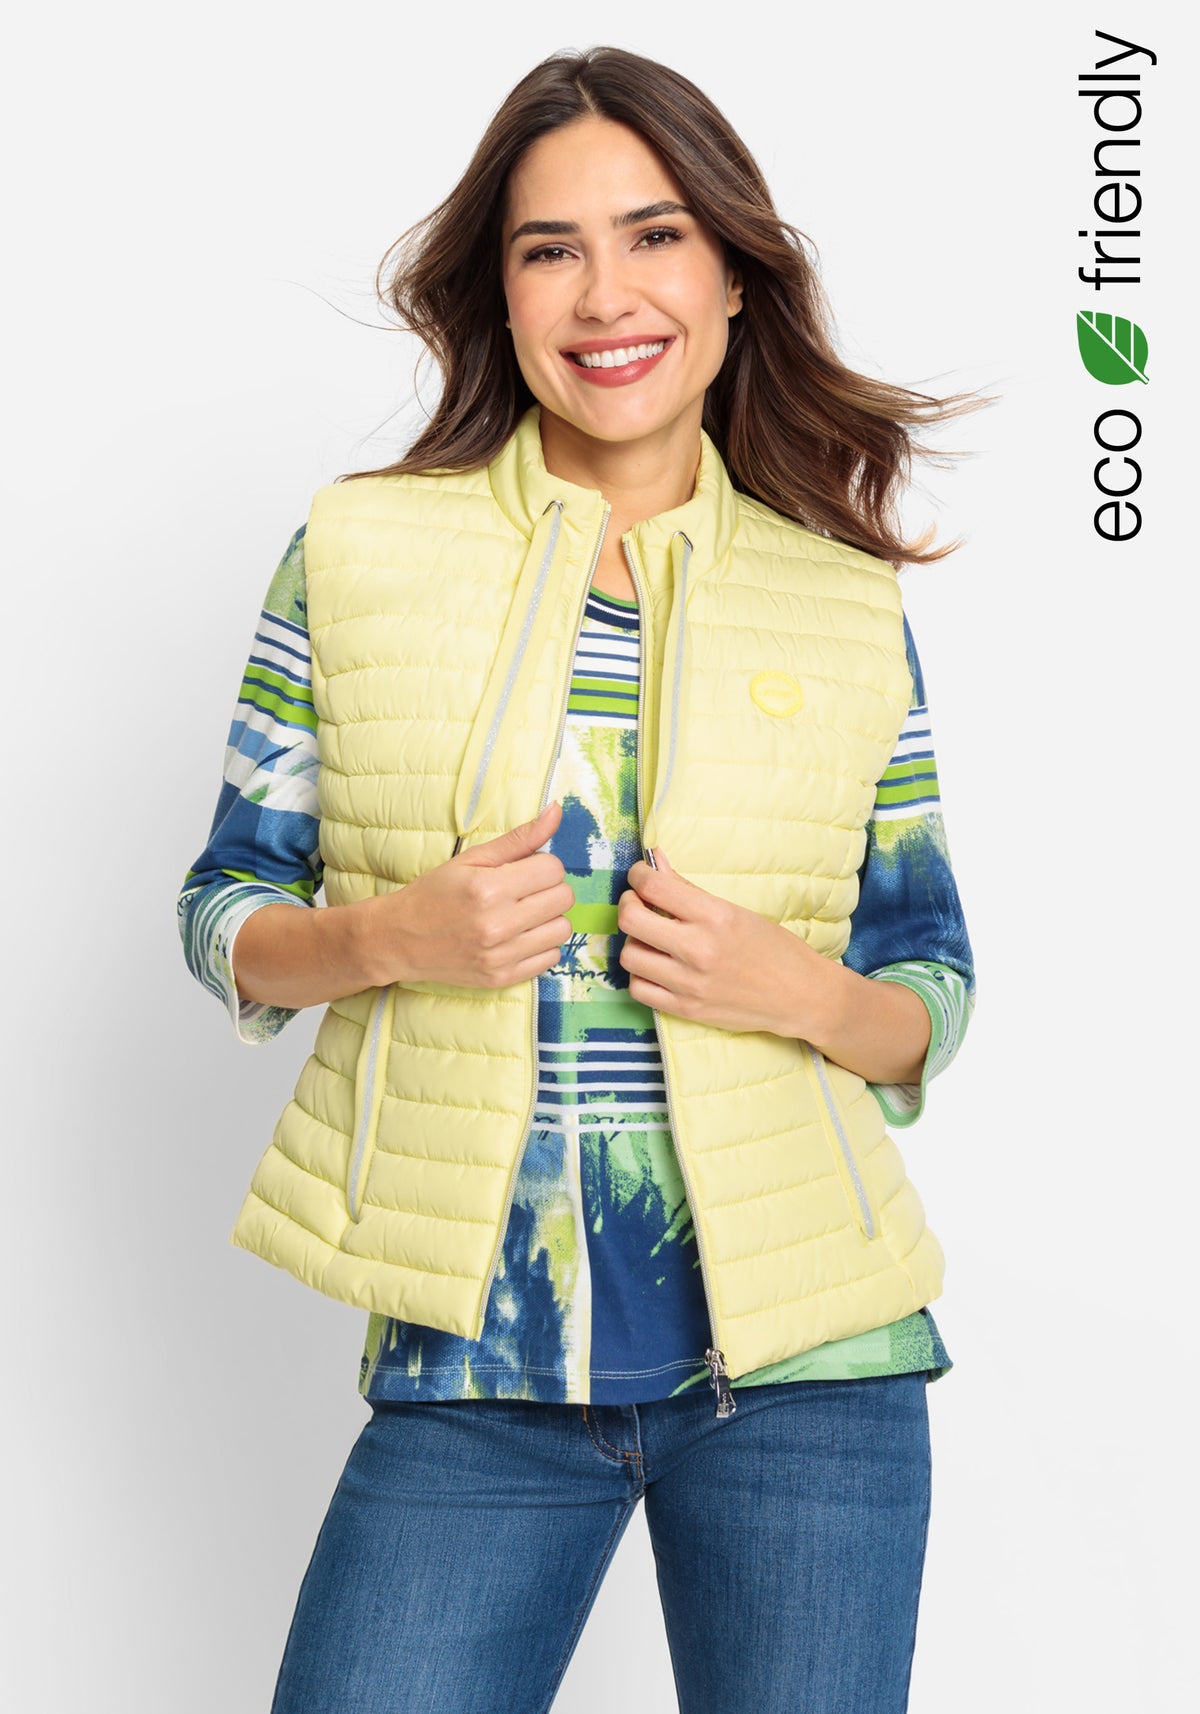 Quilted Vest containing REPREVE®